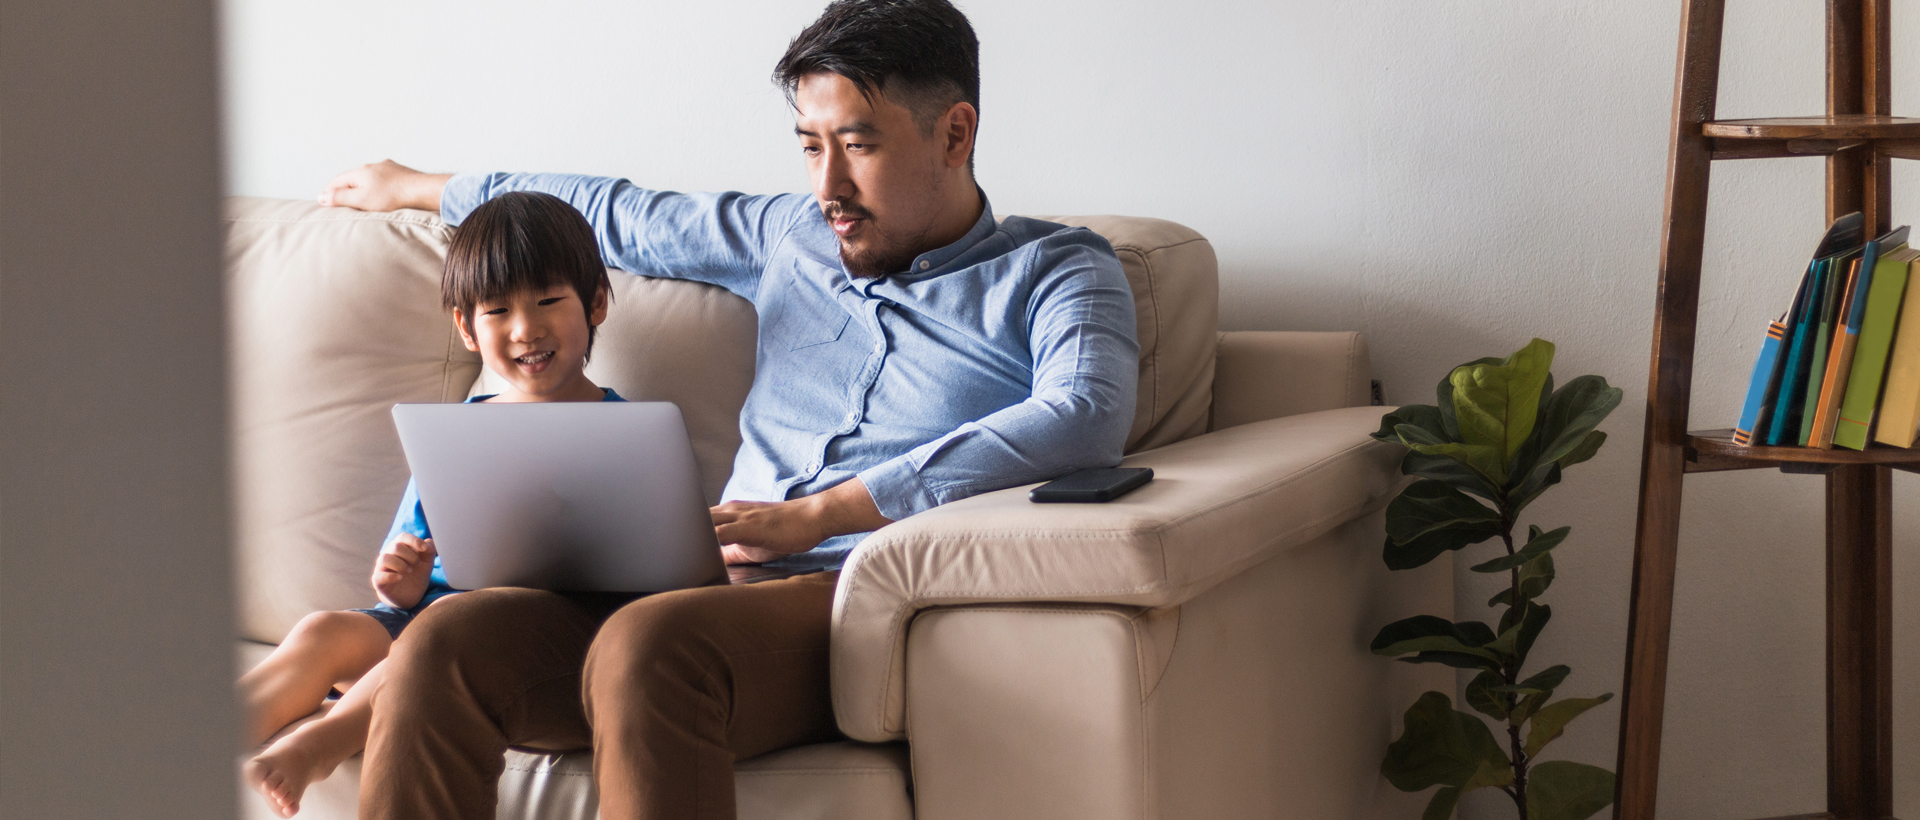 Image of father and son sitting on couch with laptop computer.